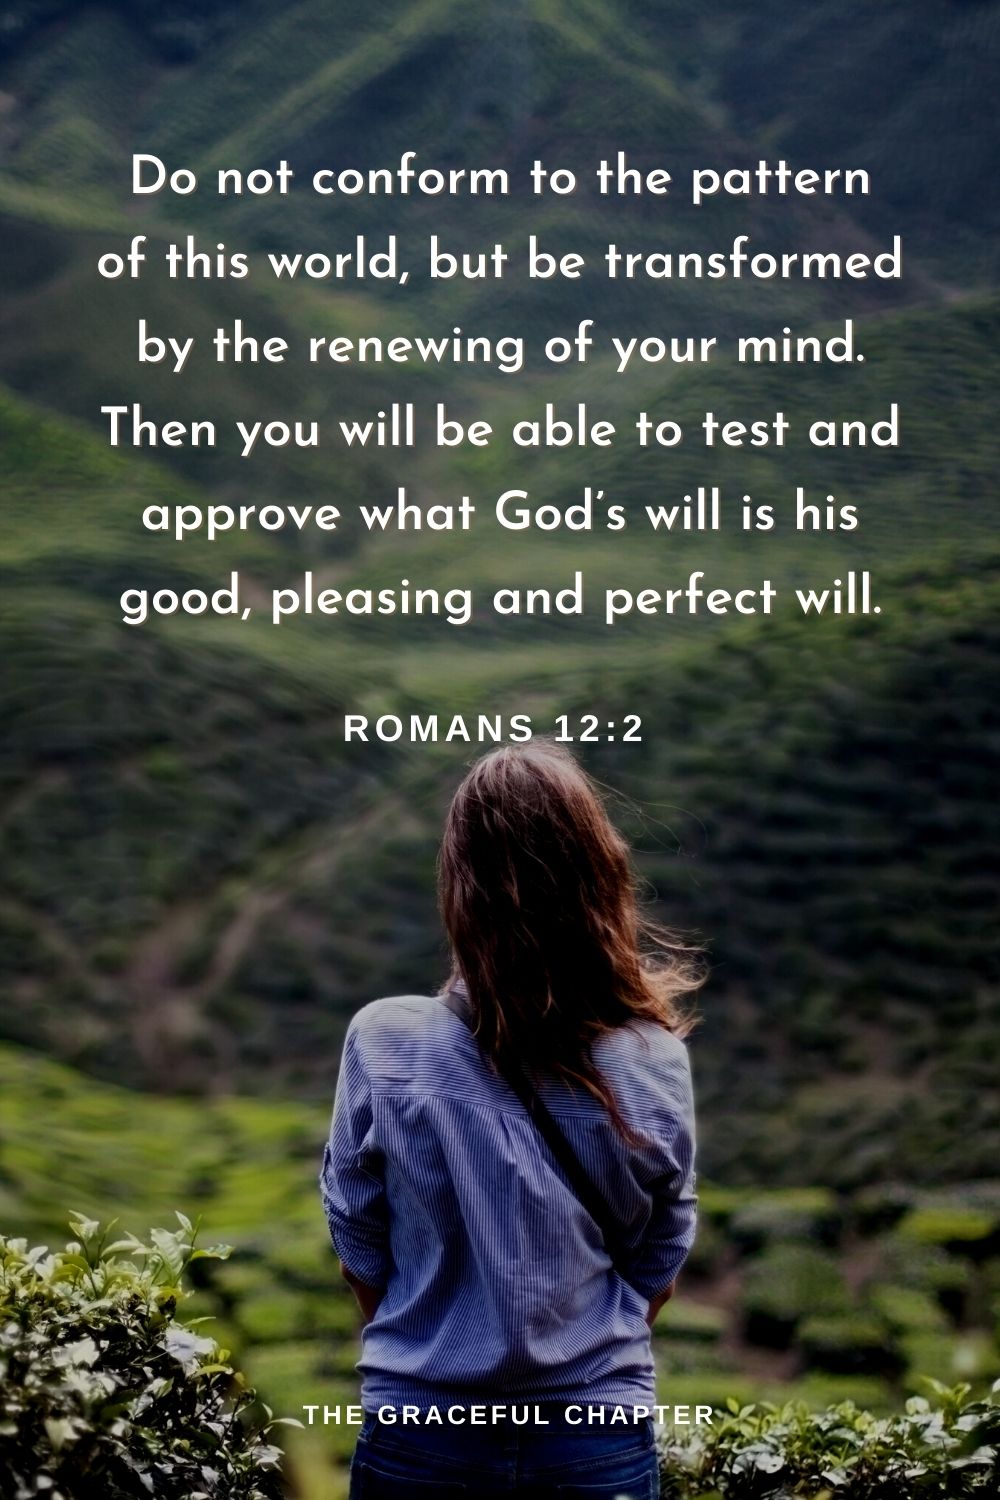 Do not conform to the pattern of this world, but be transformed by the renewing of your mind. Then you will be able to test and approve what God’s will is his good, pleasing and perfect will.